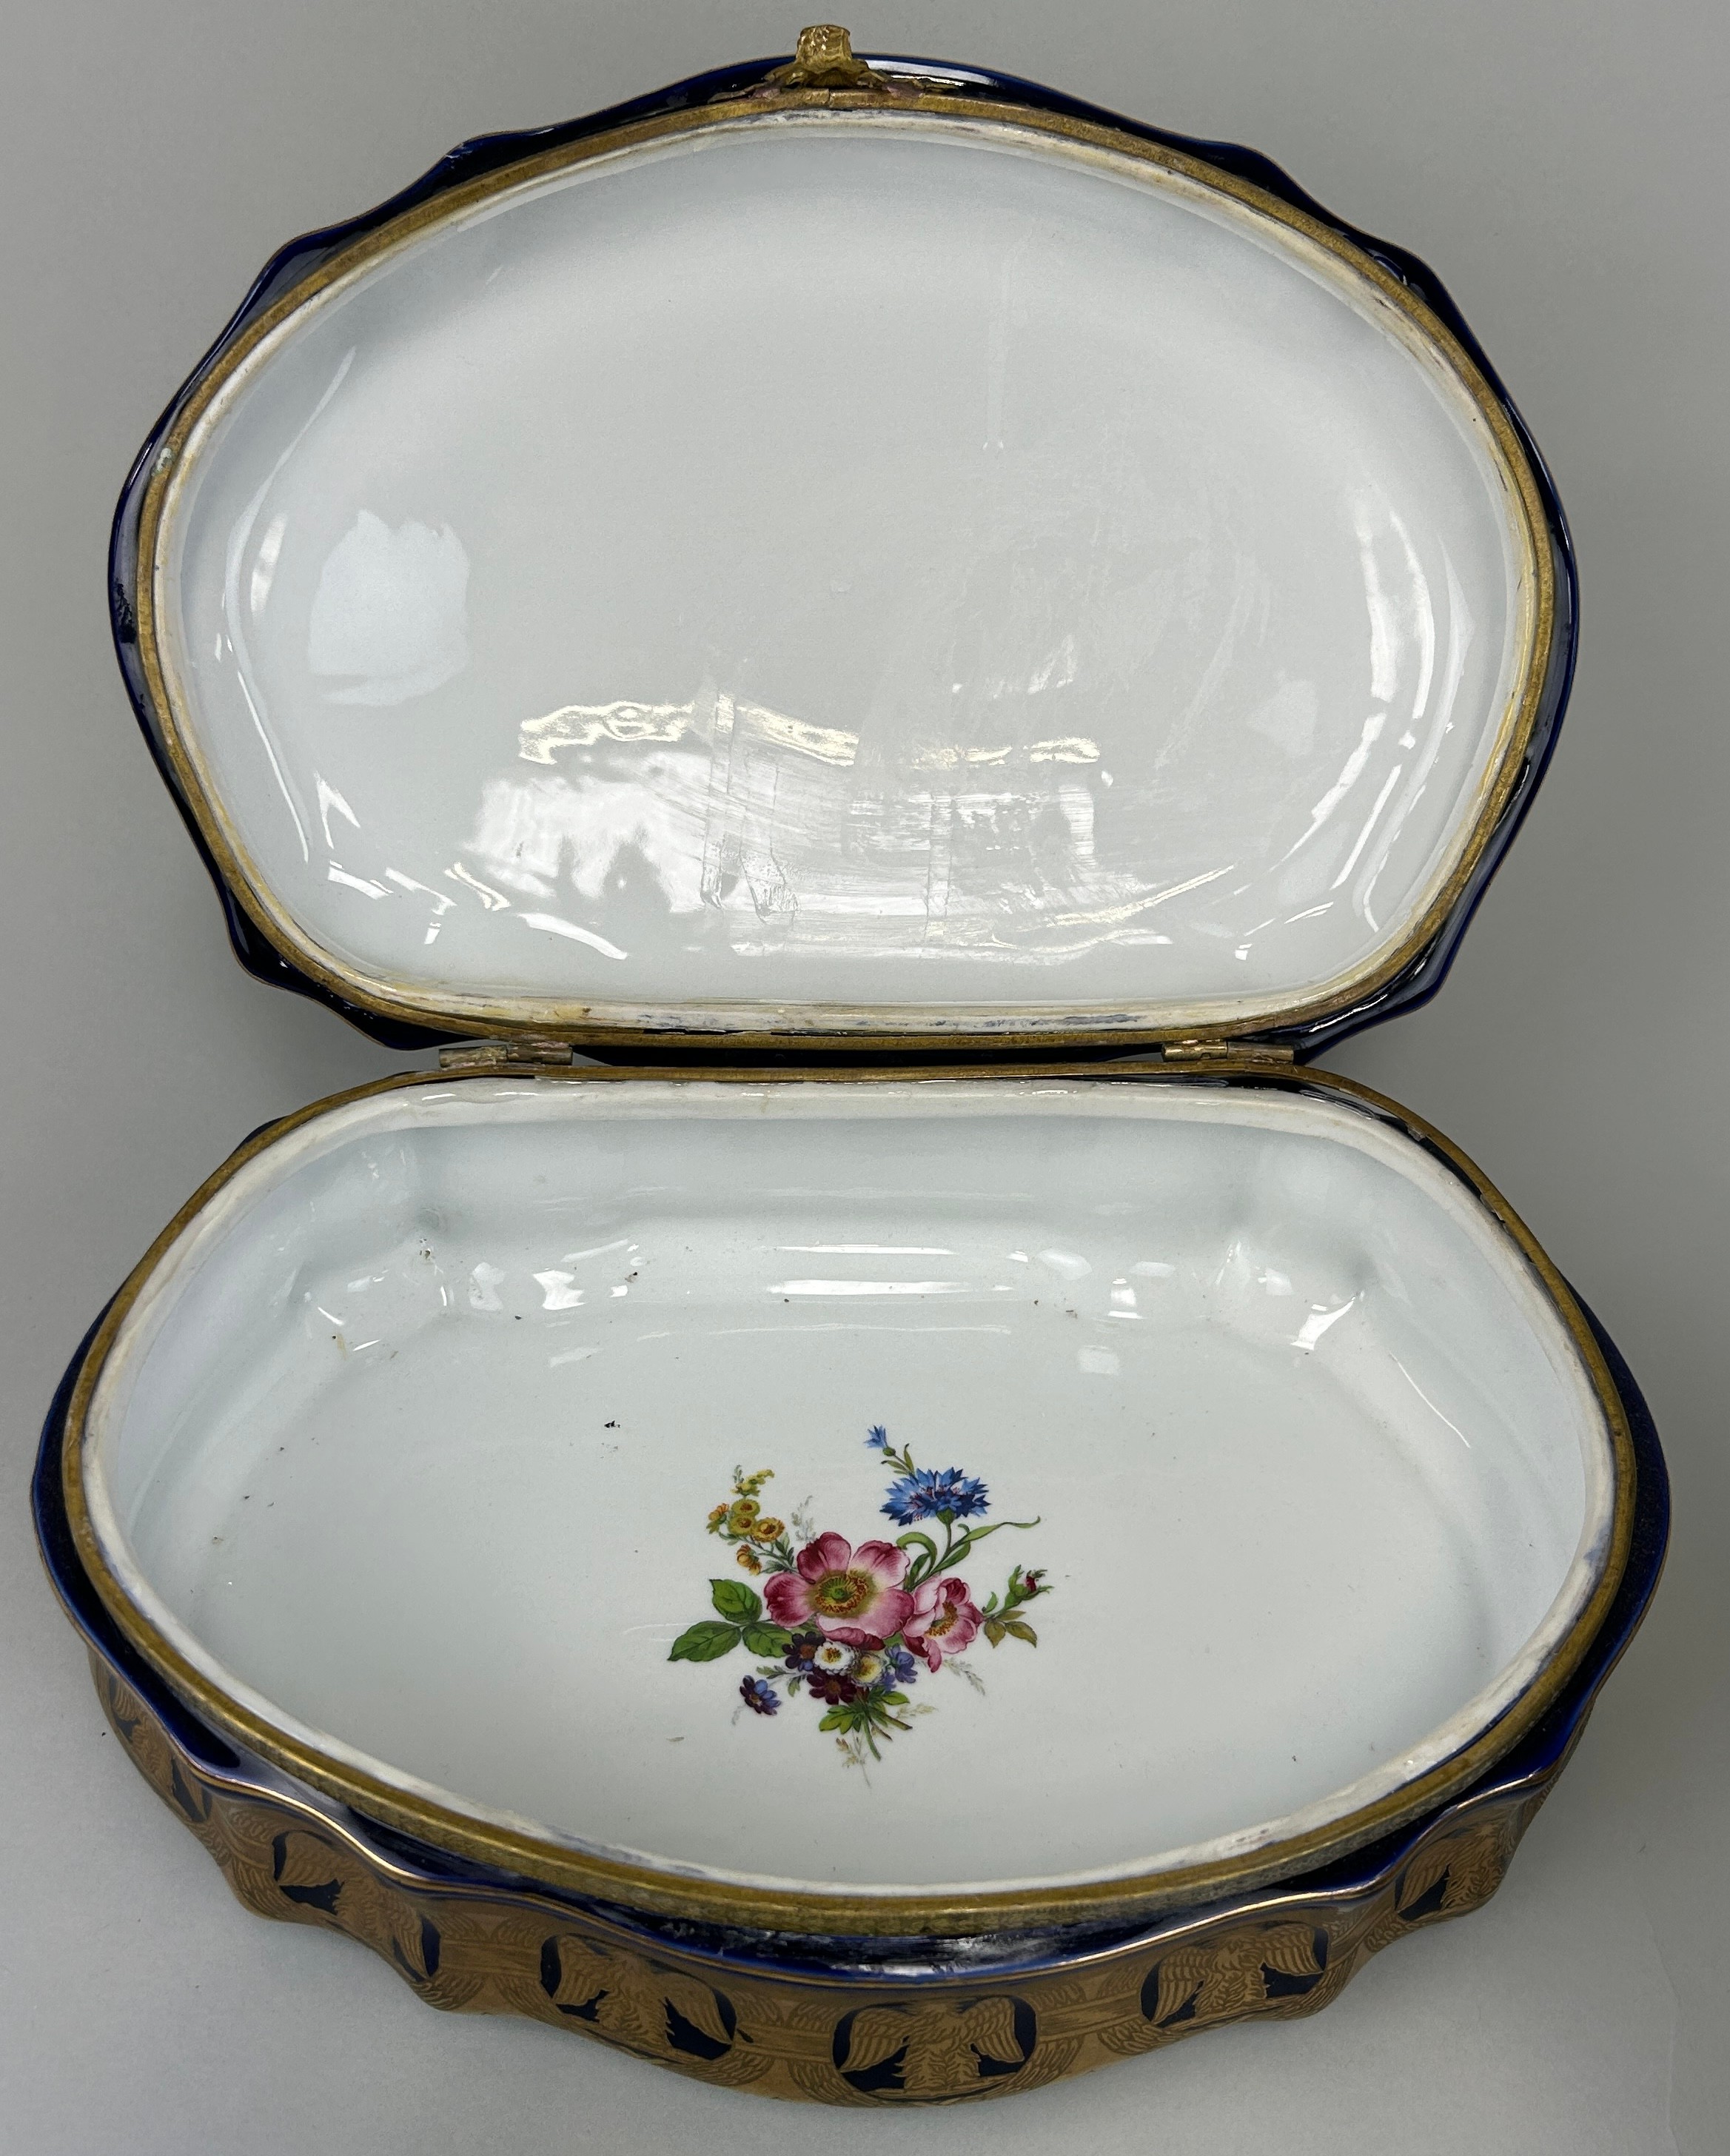 AFTER SEVRES: A SEVRES STYLE PORCELAIN BOX DECORATED WITH A HORSE AND RIDER, WITH GILT EAGLES. - Image 4 of 5